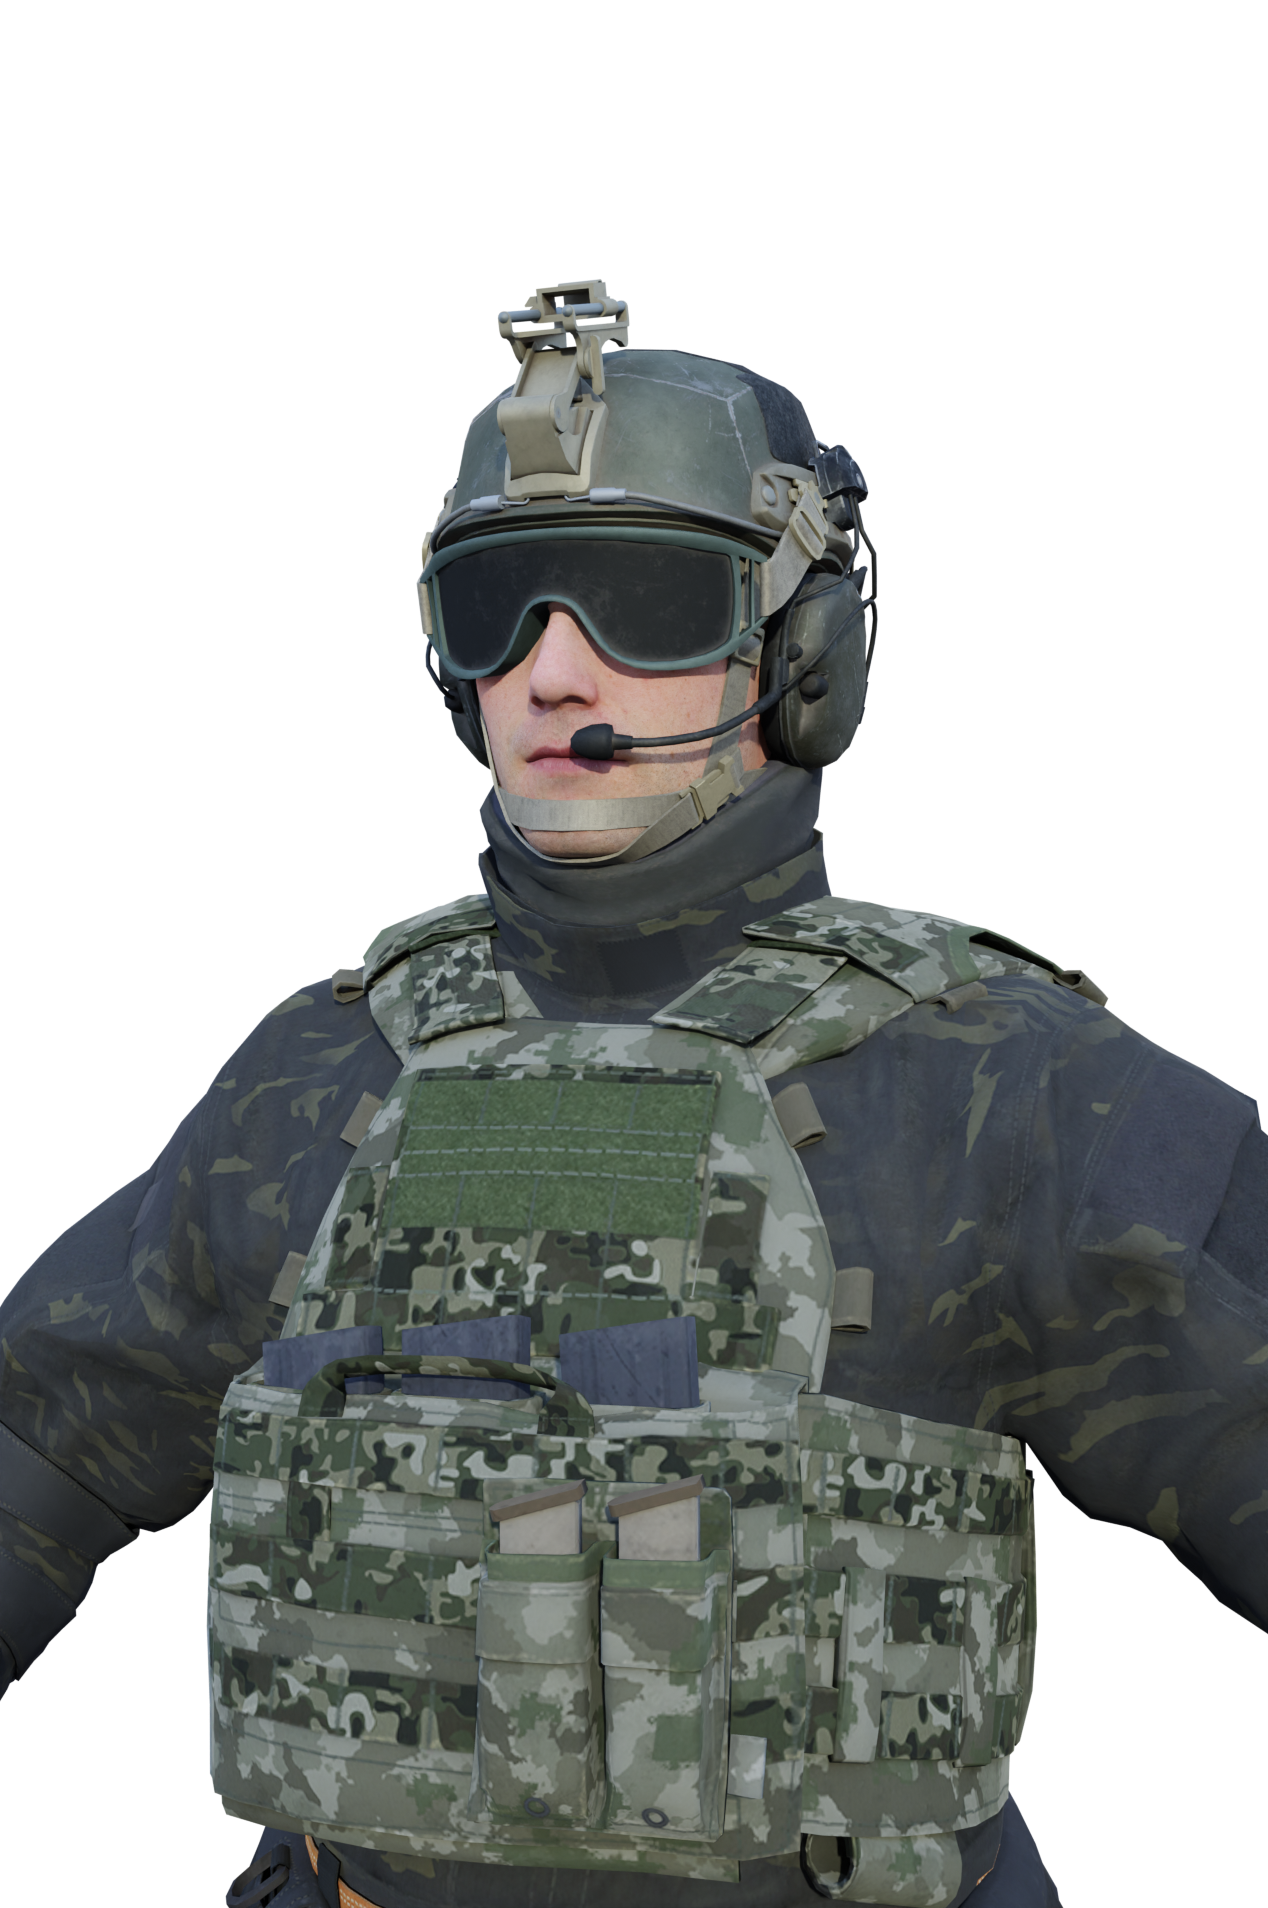 Solider free 3D character models